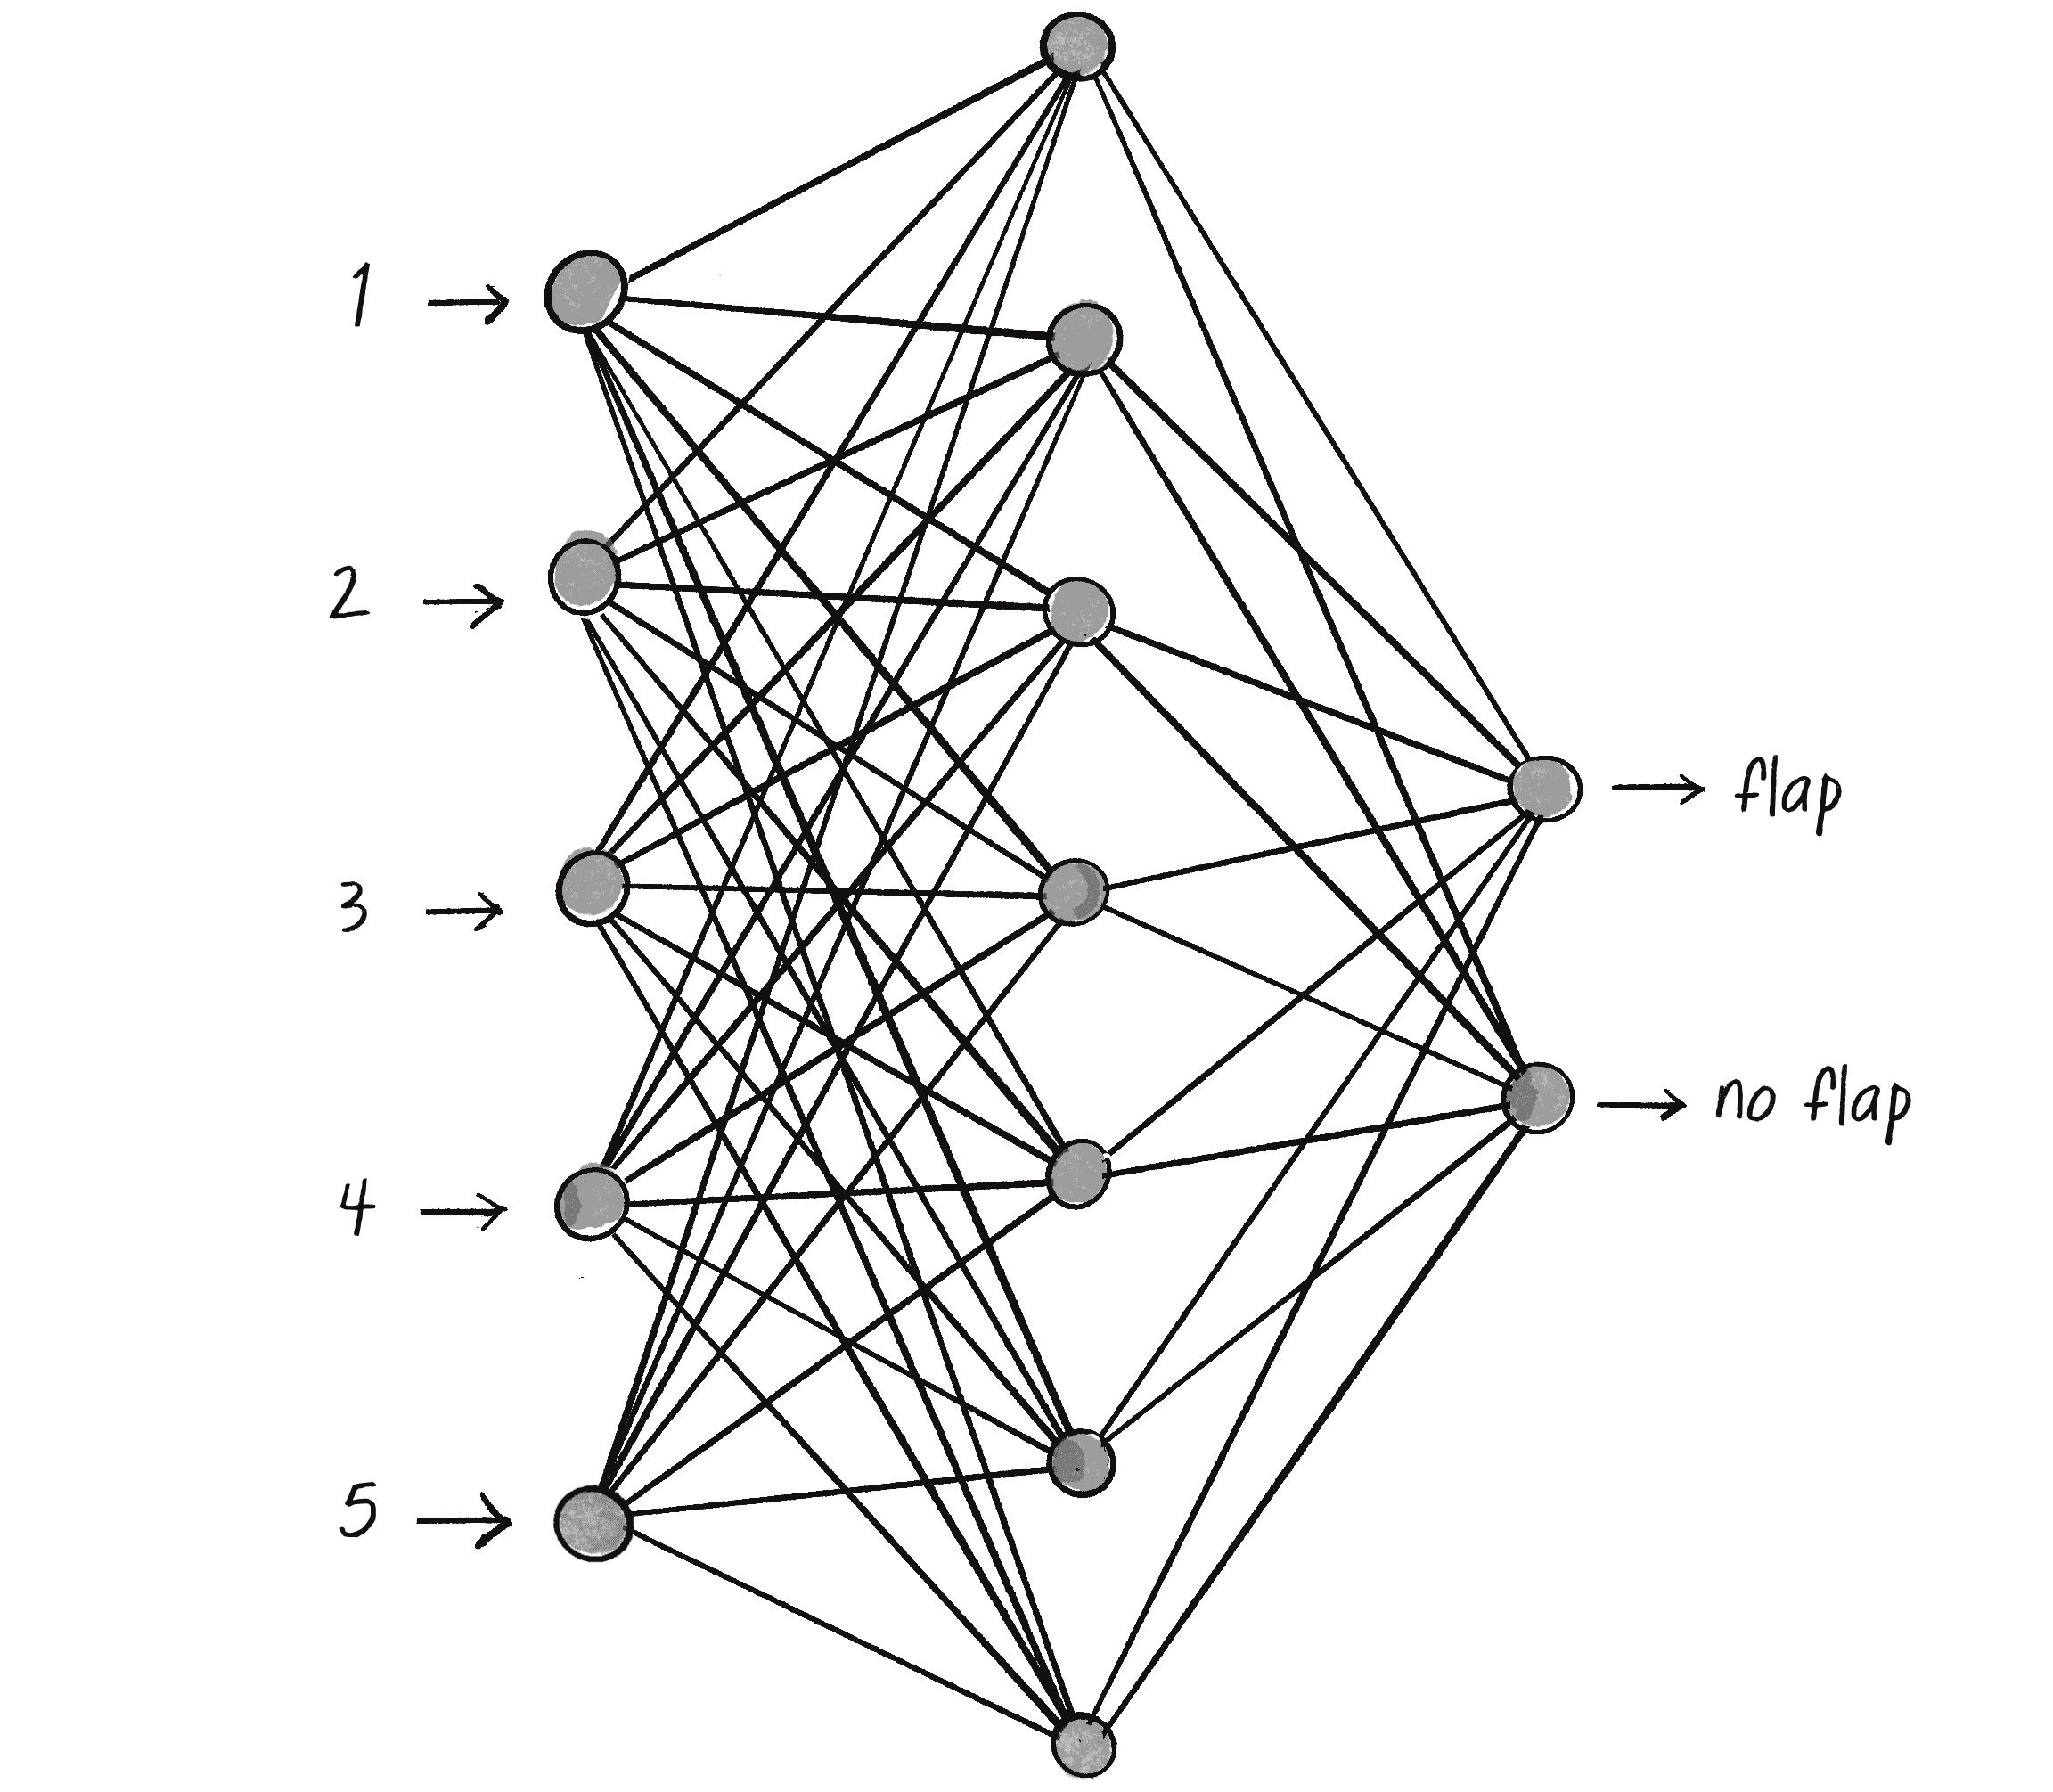 Figure 11.3: The neural network for Flappy Bird as ml5.js might design it